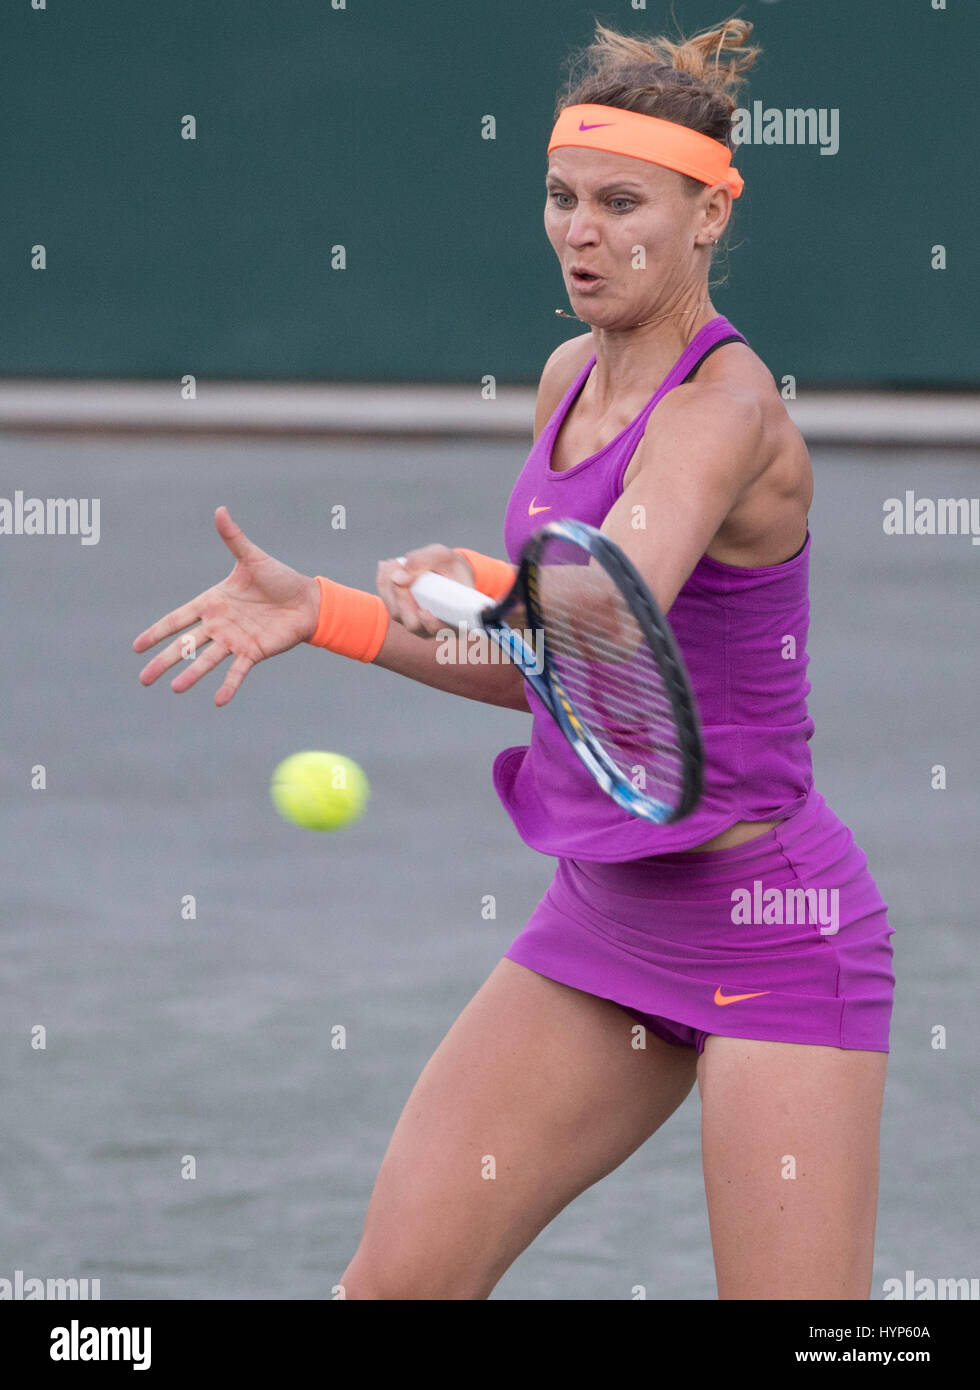 Charleston, South Carolina, USA. 6th Apr, 2017. Lucie Safarova (CZE) loses to Laura Siegemund (GER) 6-2, 6-3, at the Volvo Car Open being played at Family Circle Tennis Center in Charleston, South Carolina. © Leslie Billman/Tennisclix/Cal Sport Media/Alamy Live News Stock Photo